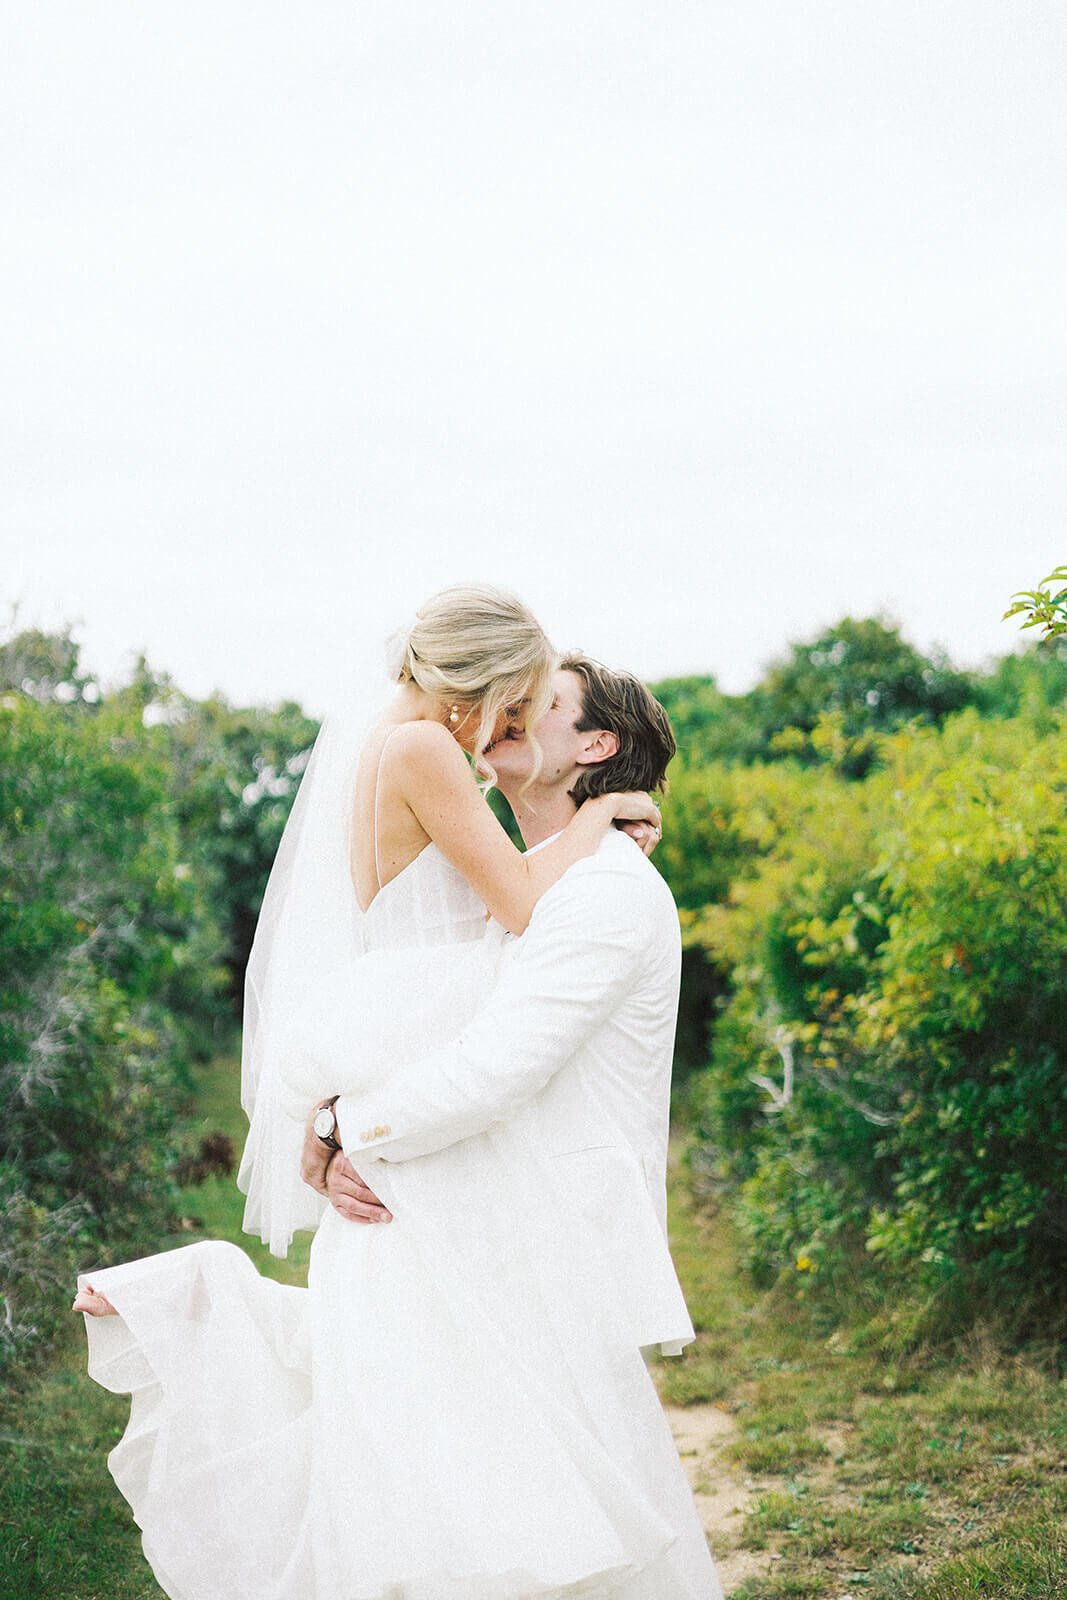 Intimate backyard wedding ceremony at a private home in Montauk, New York